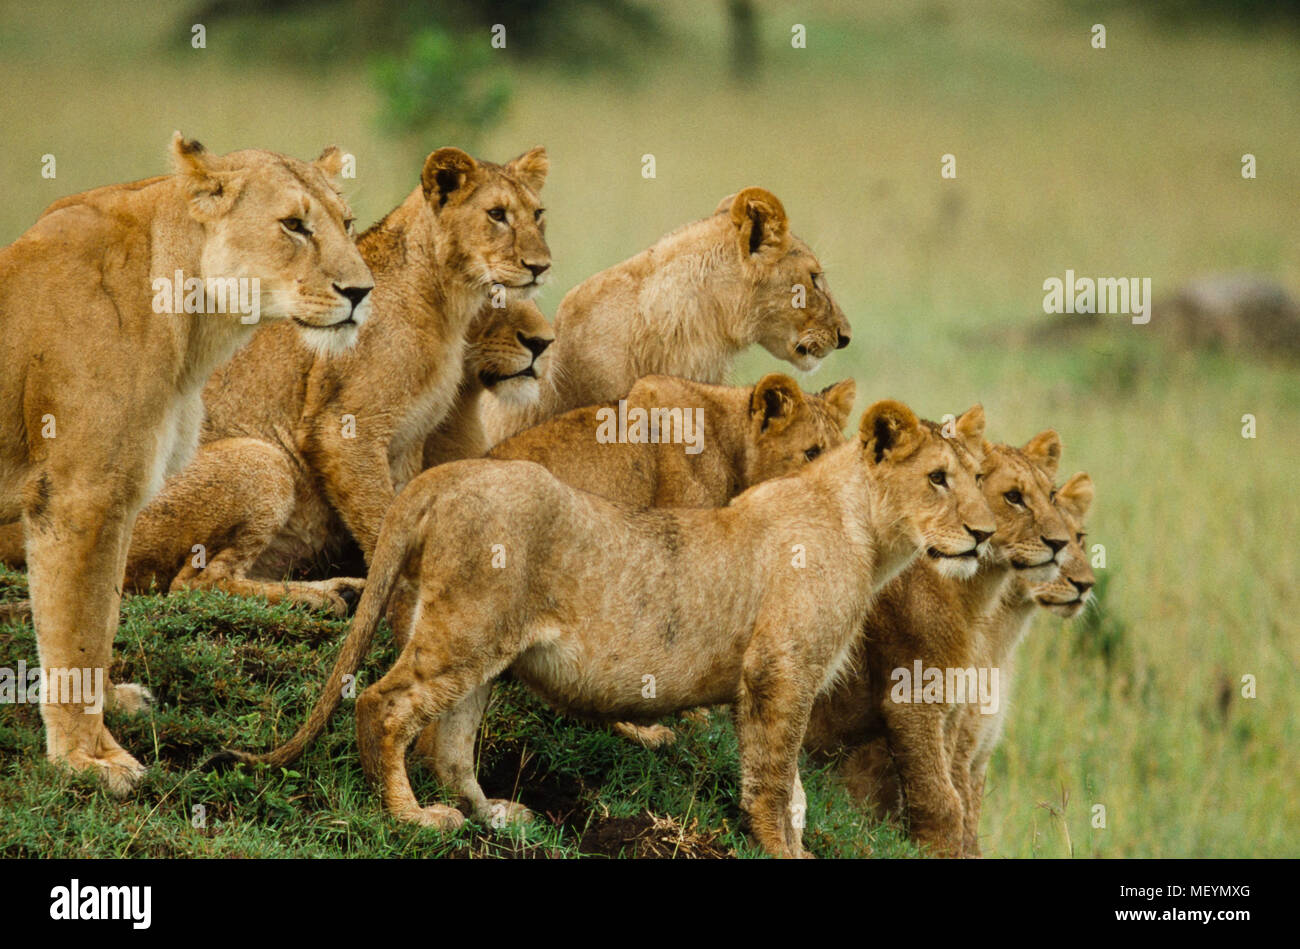 Lion pride, cubs and adults,  Serengeti National Park, Tanzania. Lion population across African continent has plummeted from 200,000 in 1980s to less  Stock Photo